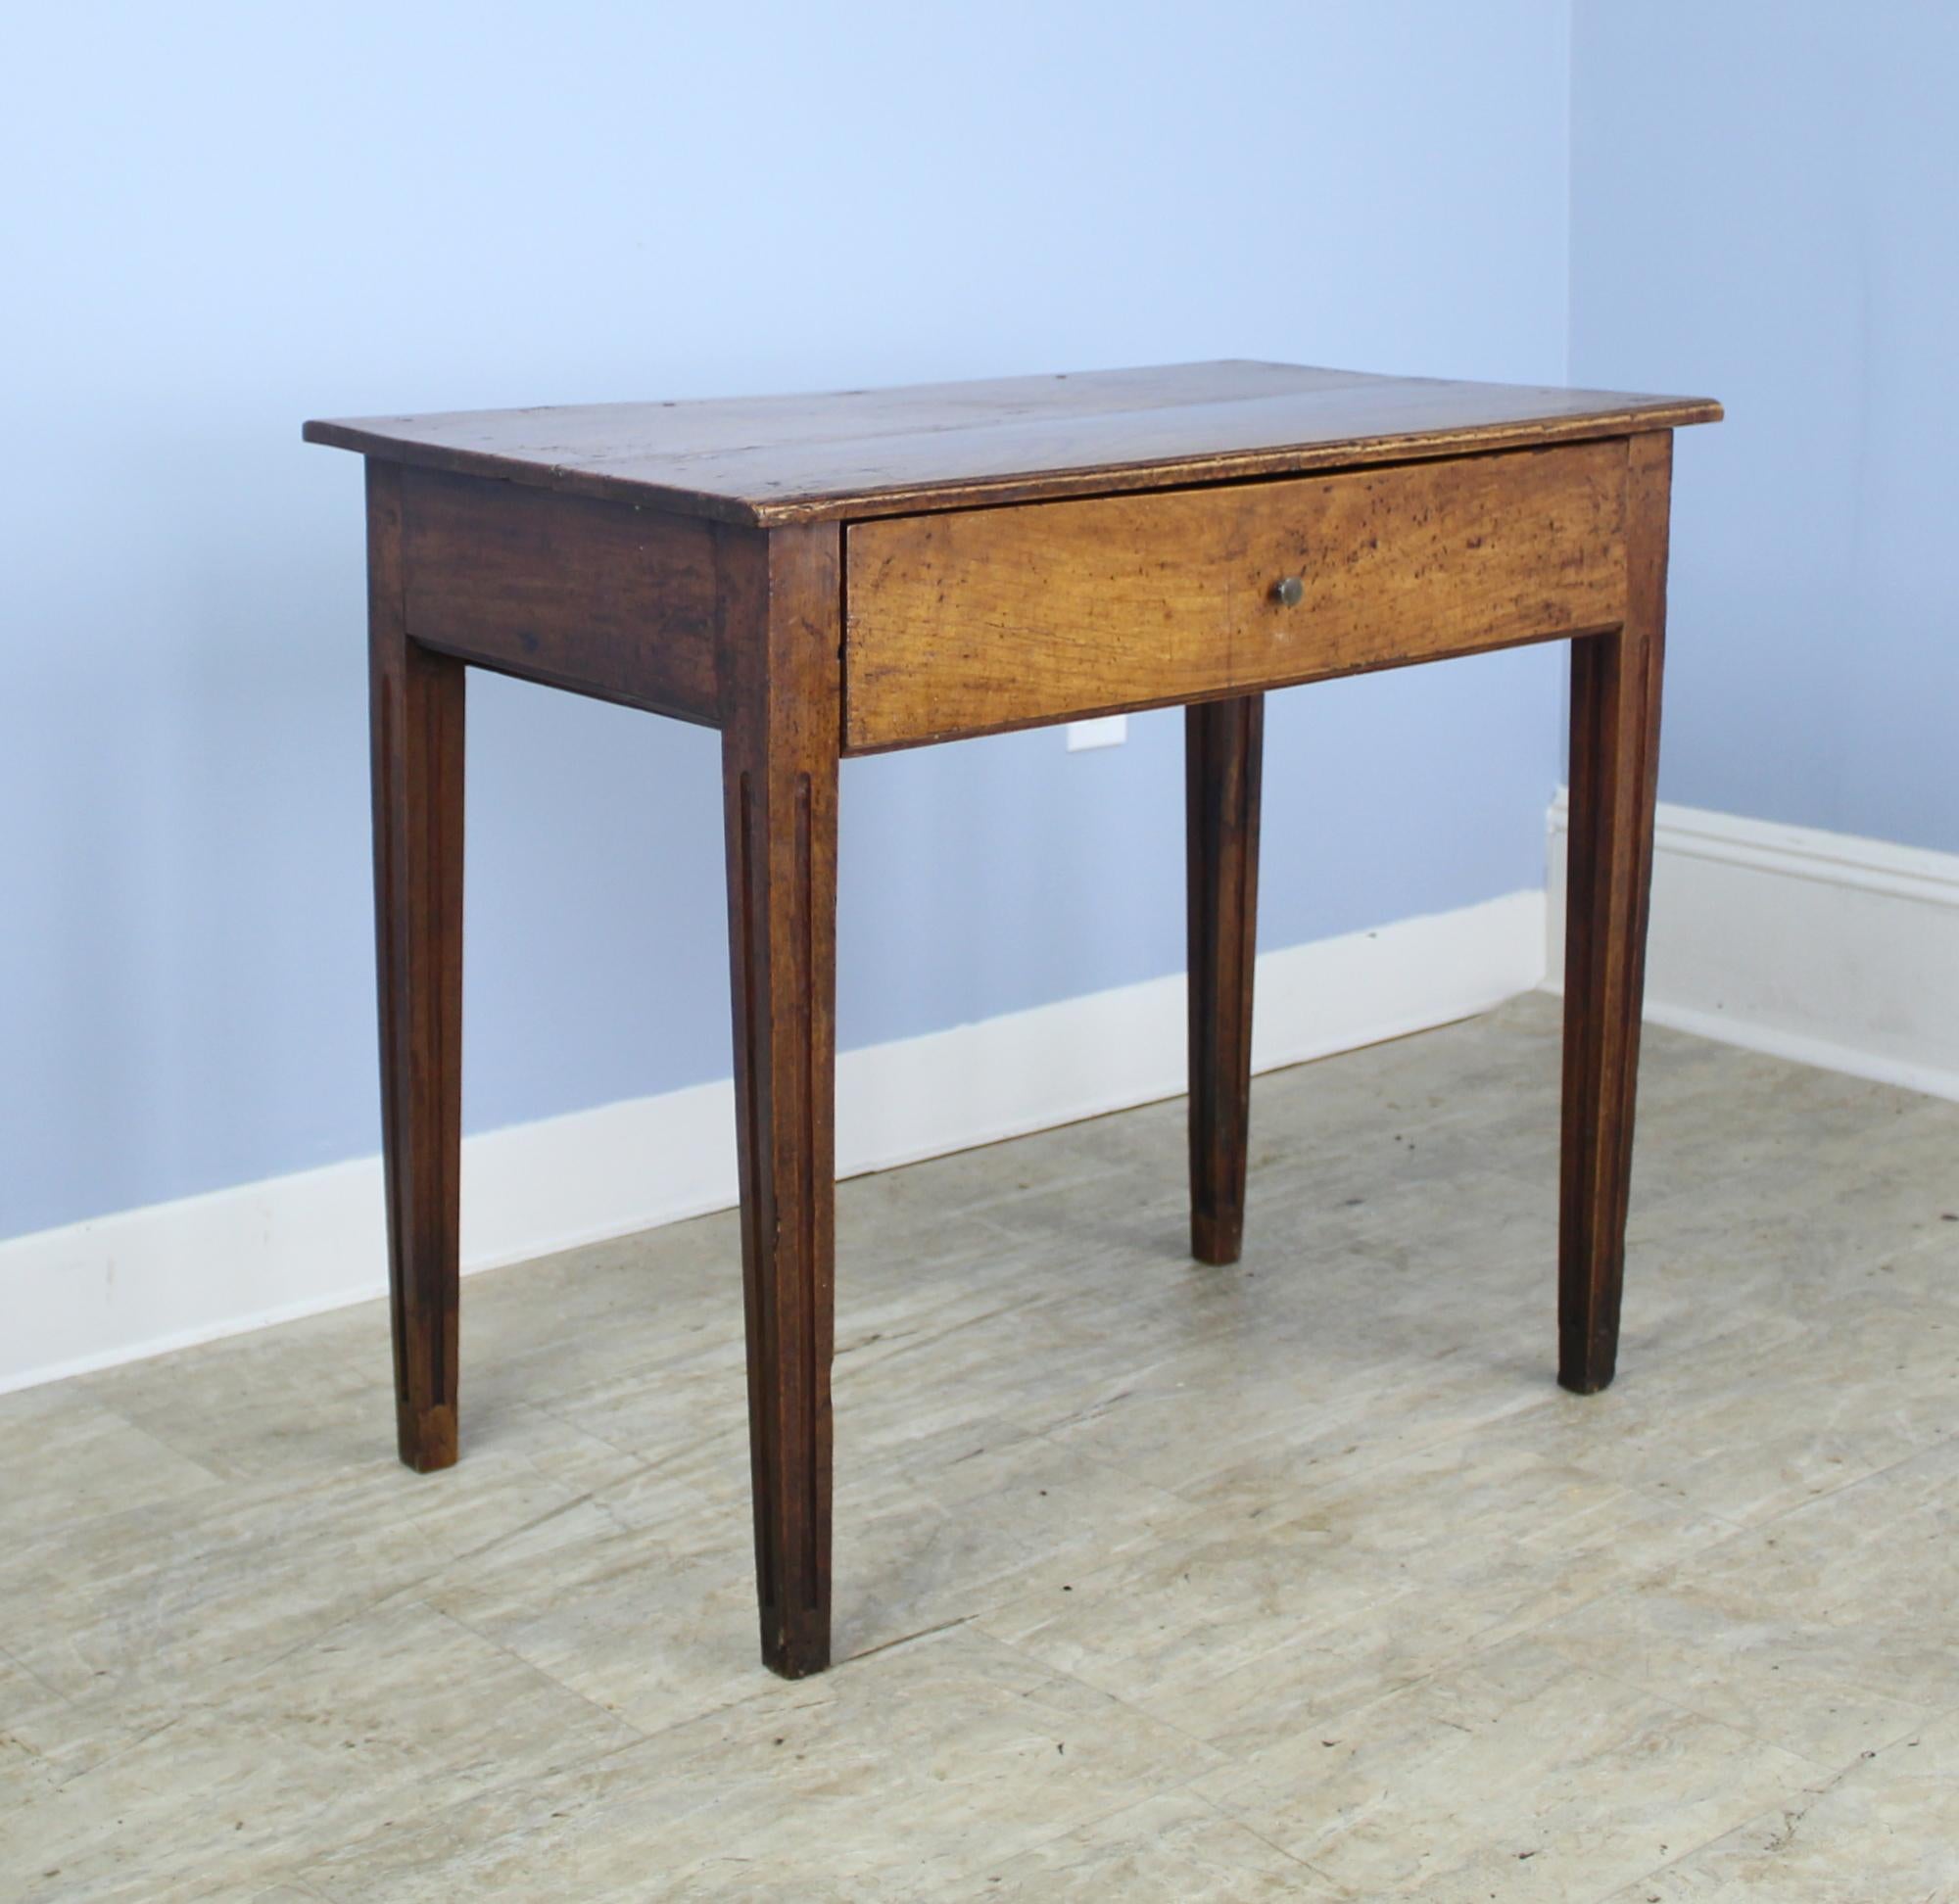 A sweet French side table in warm cherry with a single deep drawer, stylized legs and a reeded edge on the top. This table has very good color and patina, with some interesting old distress.